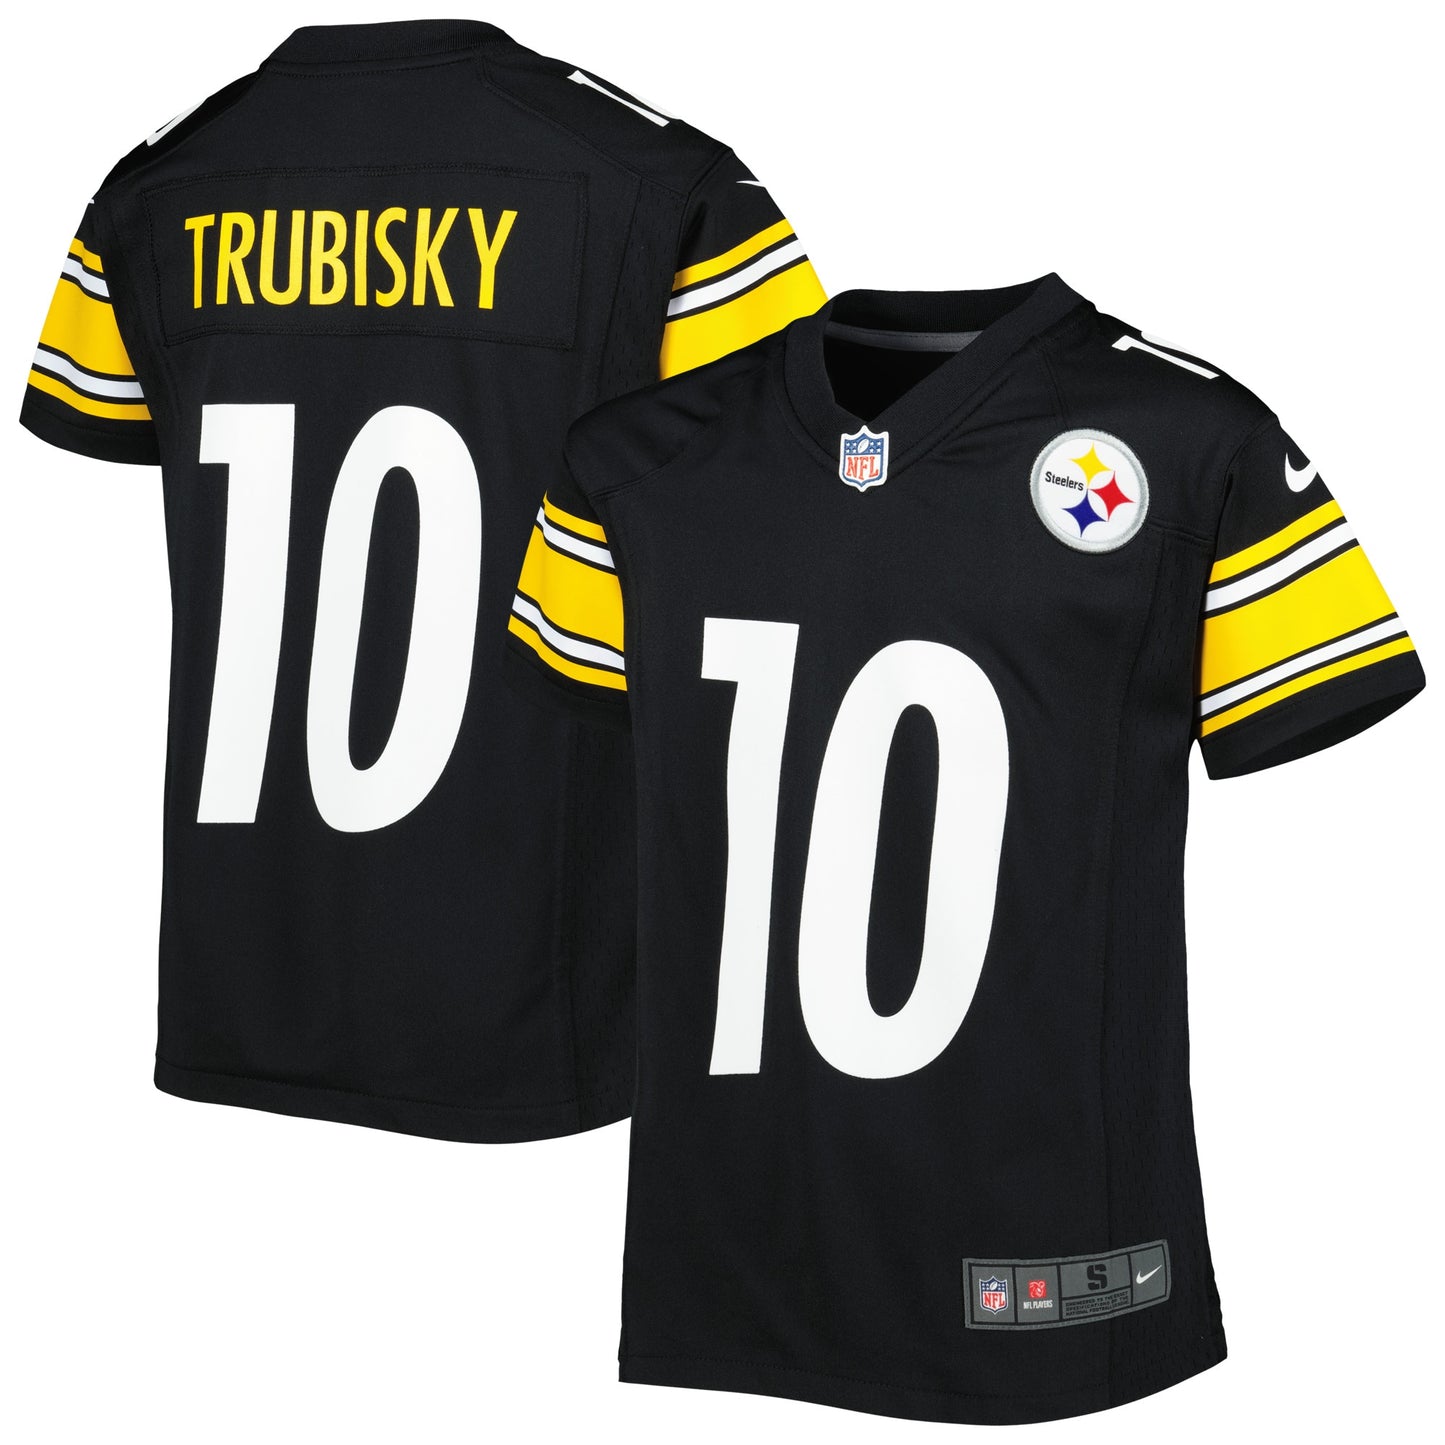 Mitchell Trubisky Pittsburgh Steelers Nike Youth Game Jersey - Black